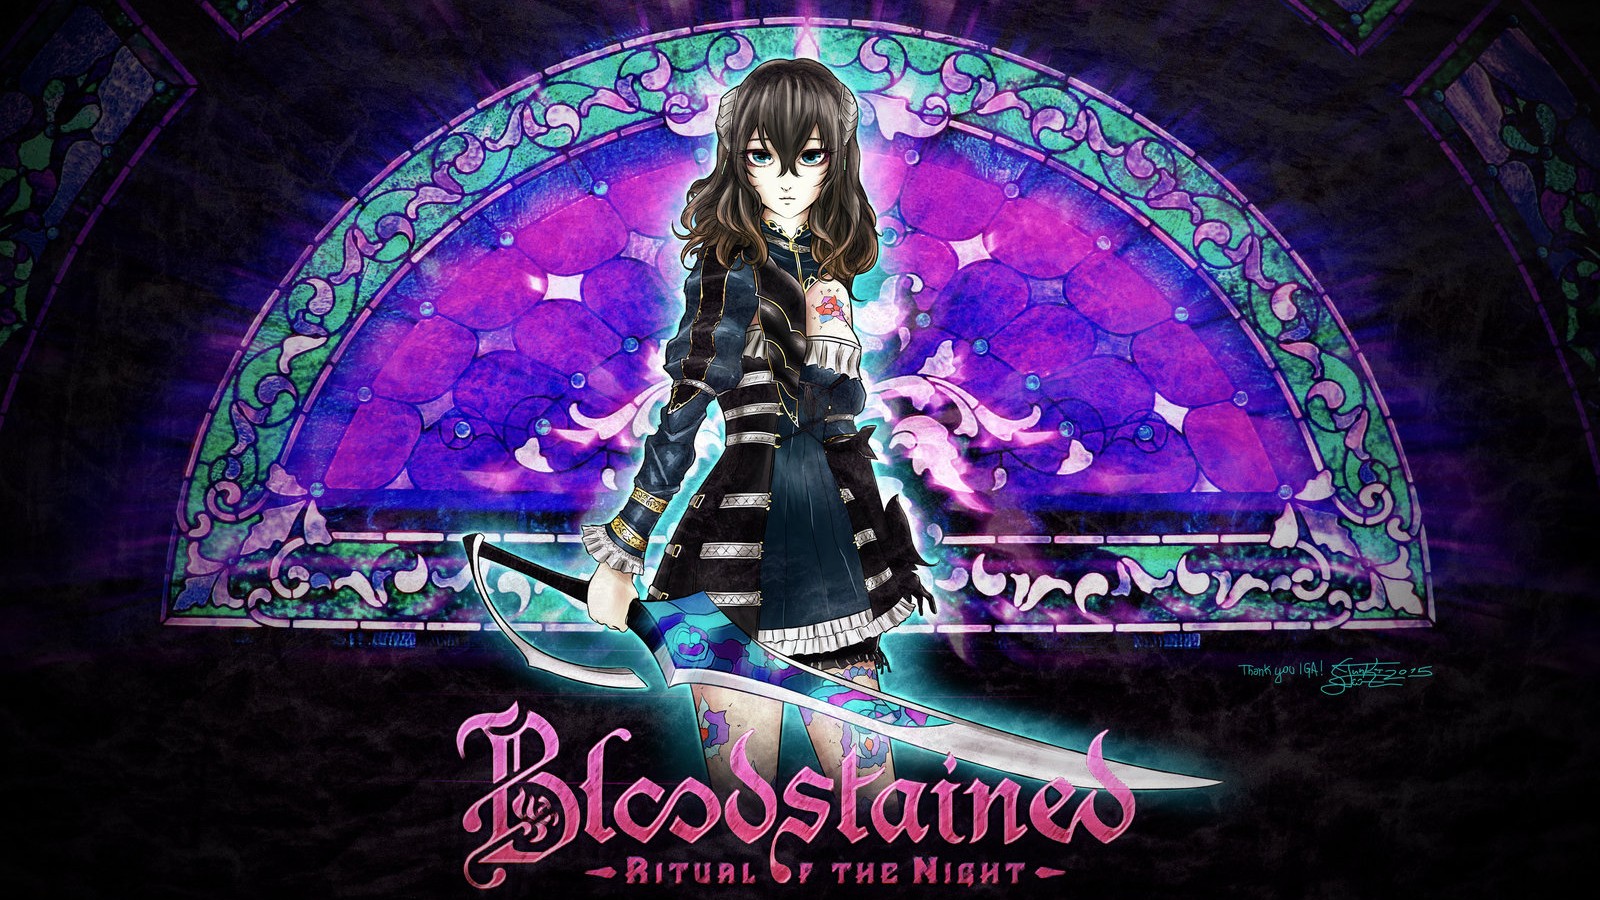 General 1600x900 Bloodstained: Ritual of the Night Miriam (Bloodstained) video games stained glass women with swords sword weapon video game girls fantasy art fantasy girl